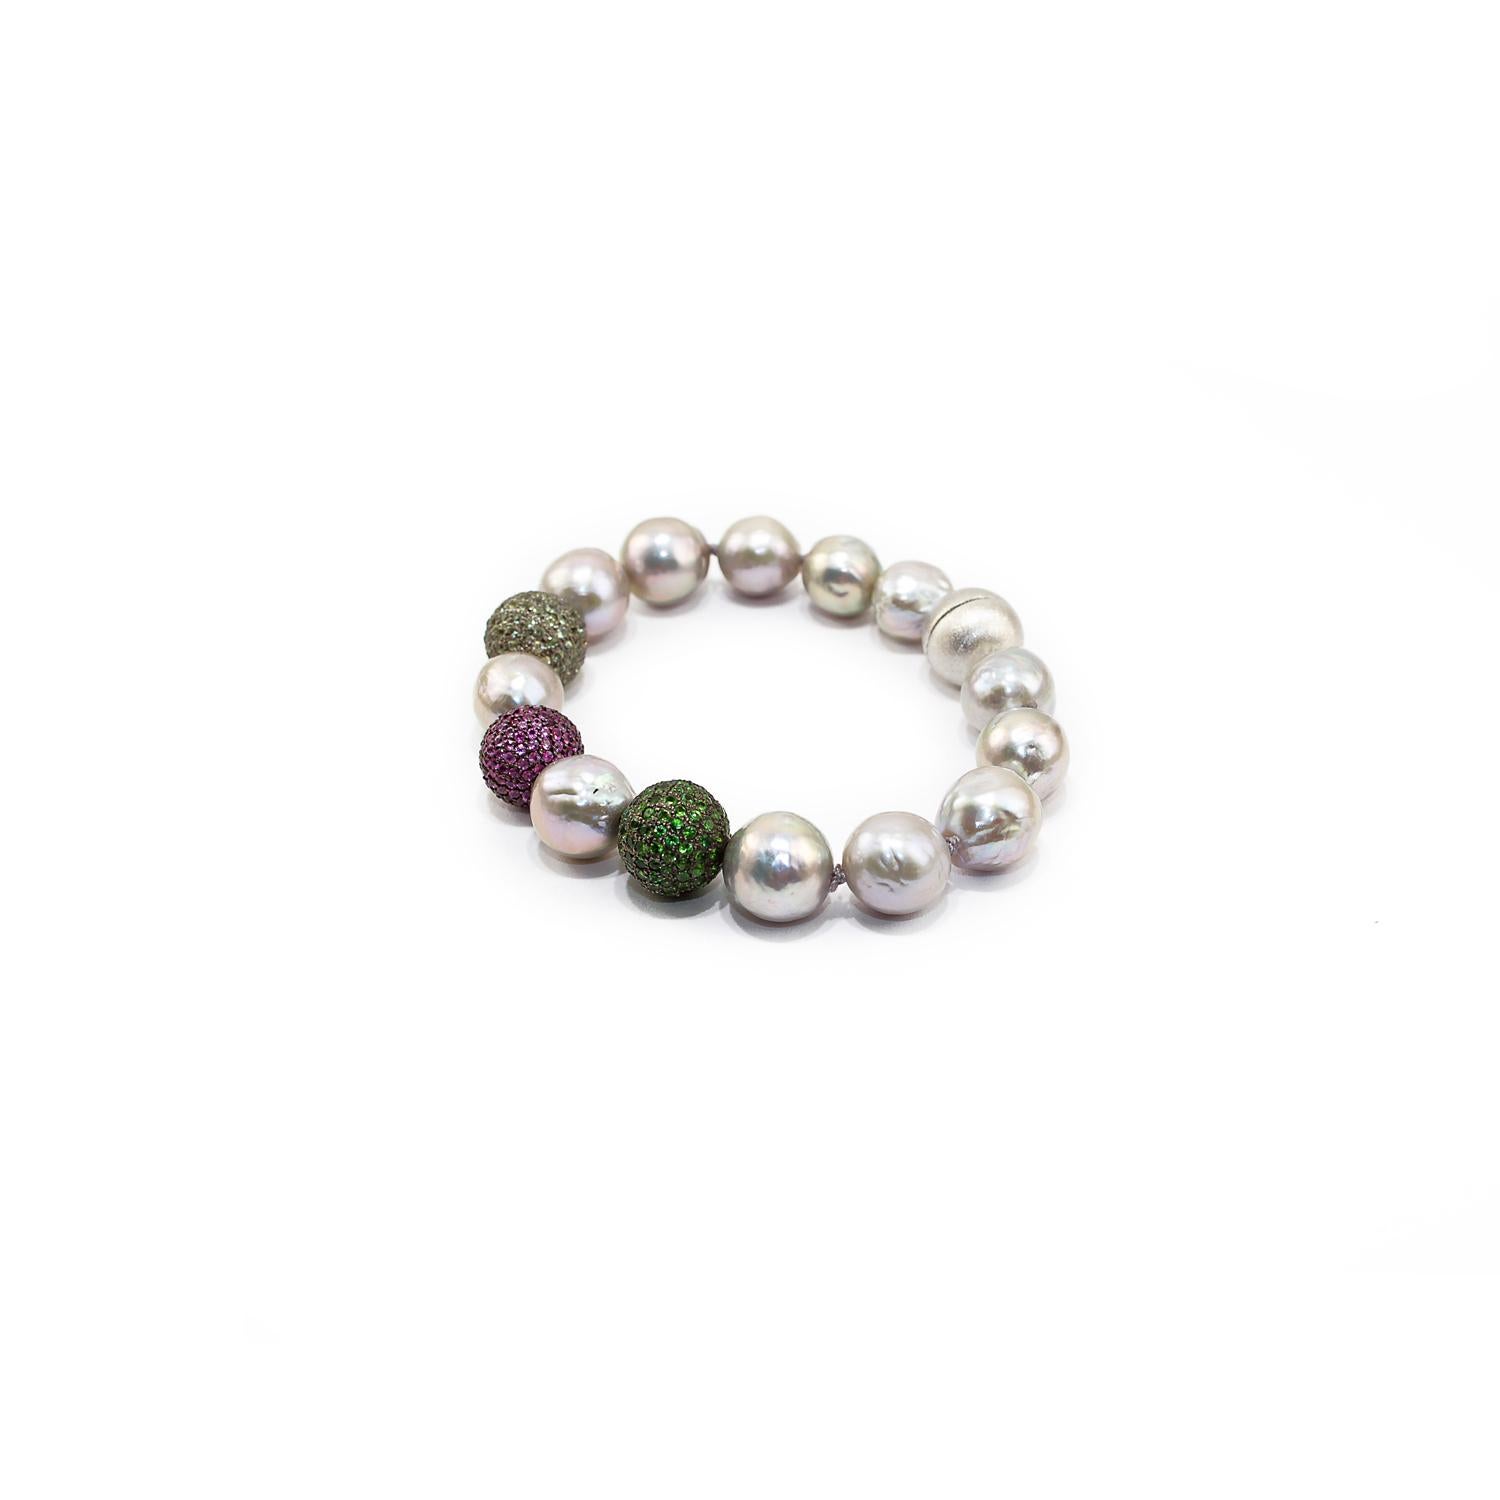 Bead Green Sapphires, Rubies and Tsavorite Pave, Pearls and Silver Clasp